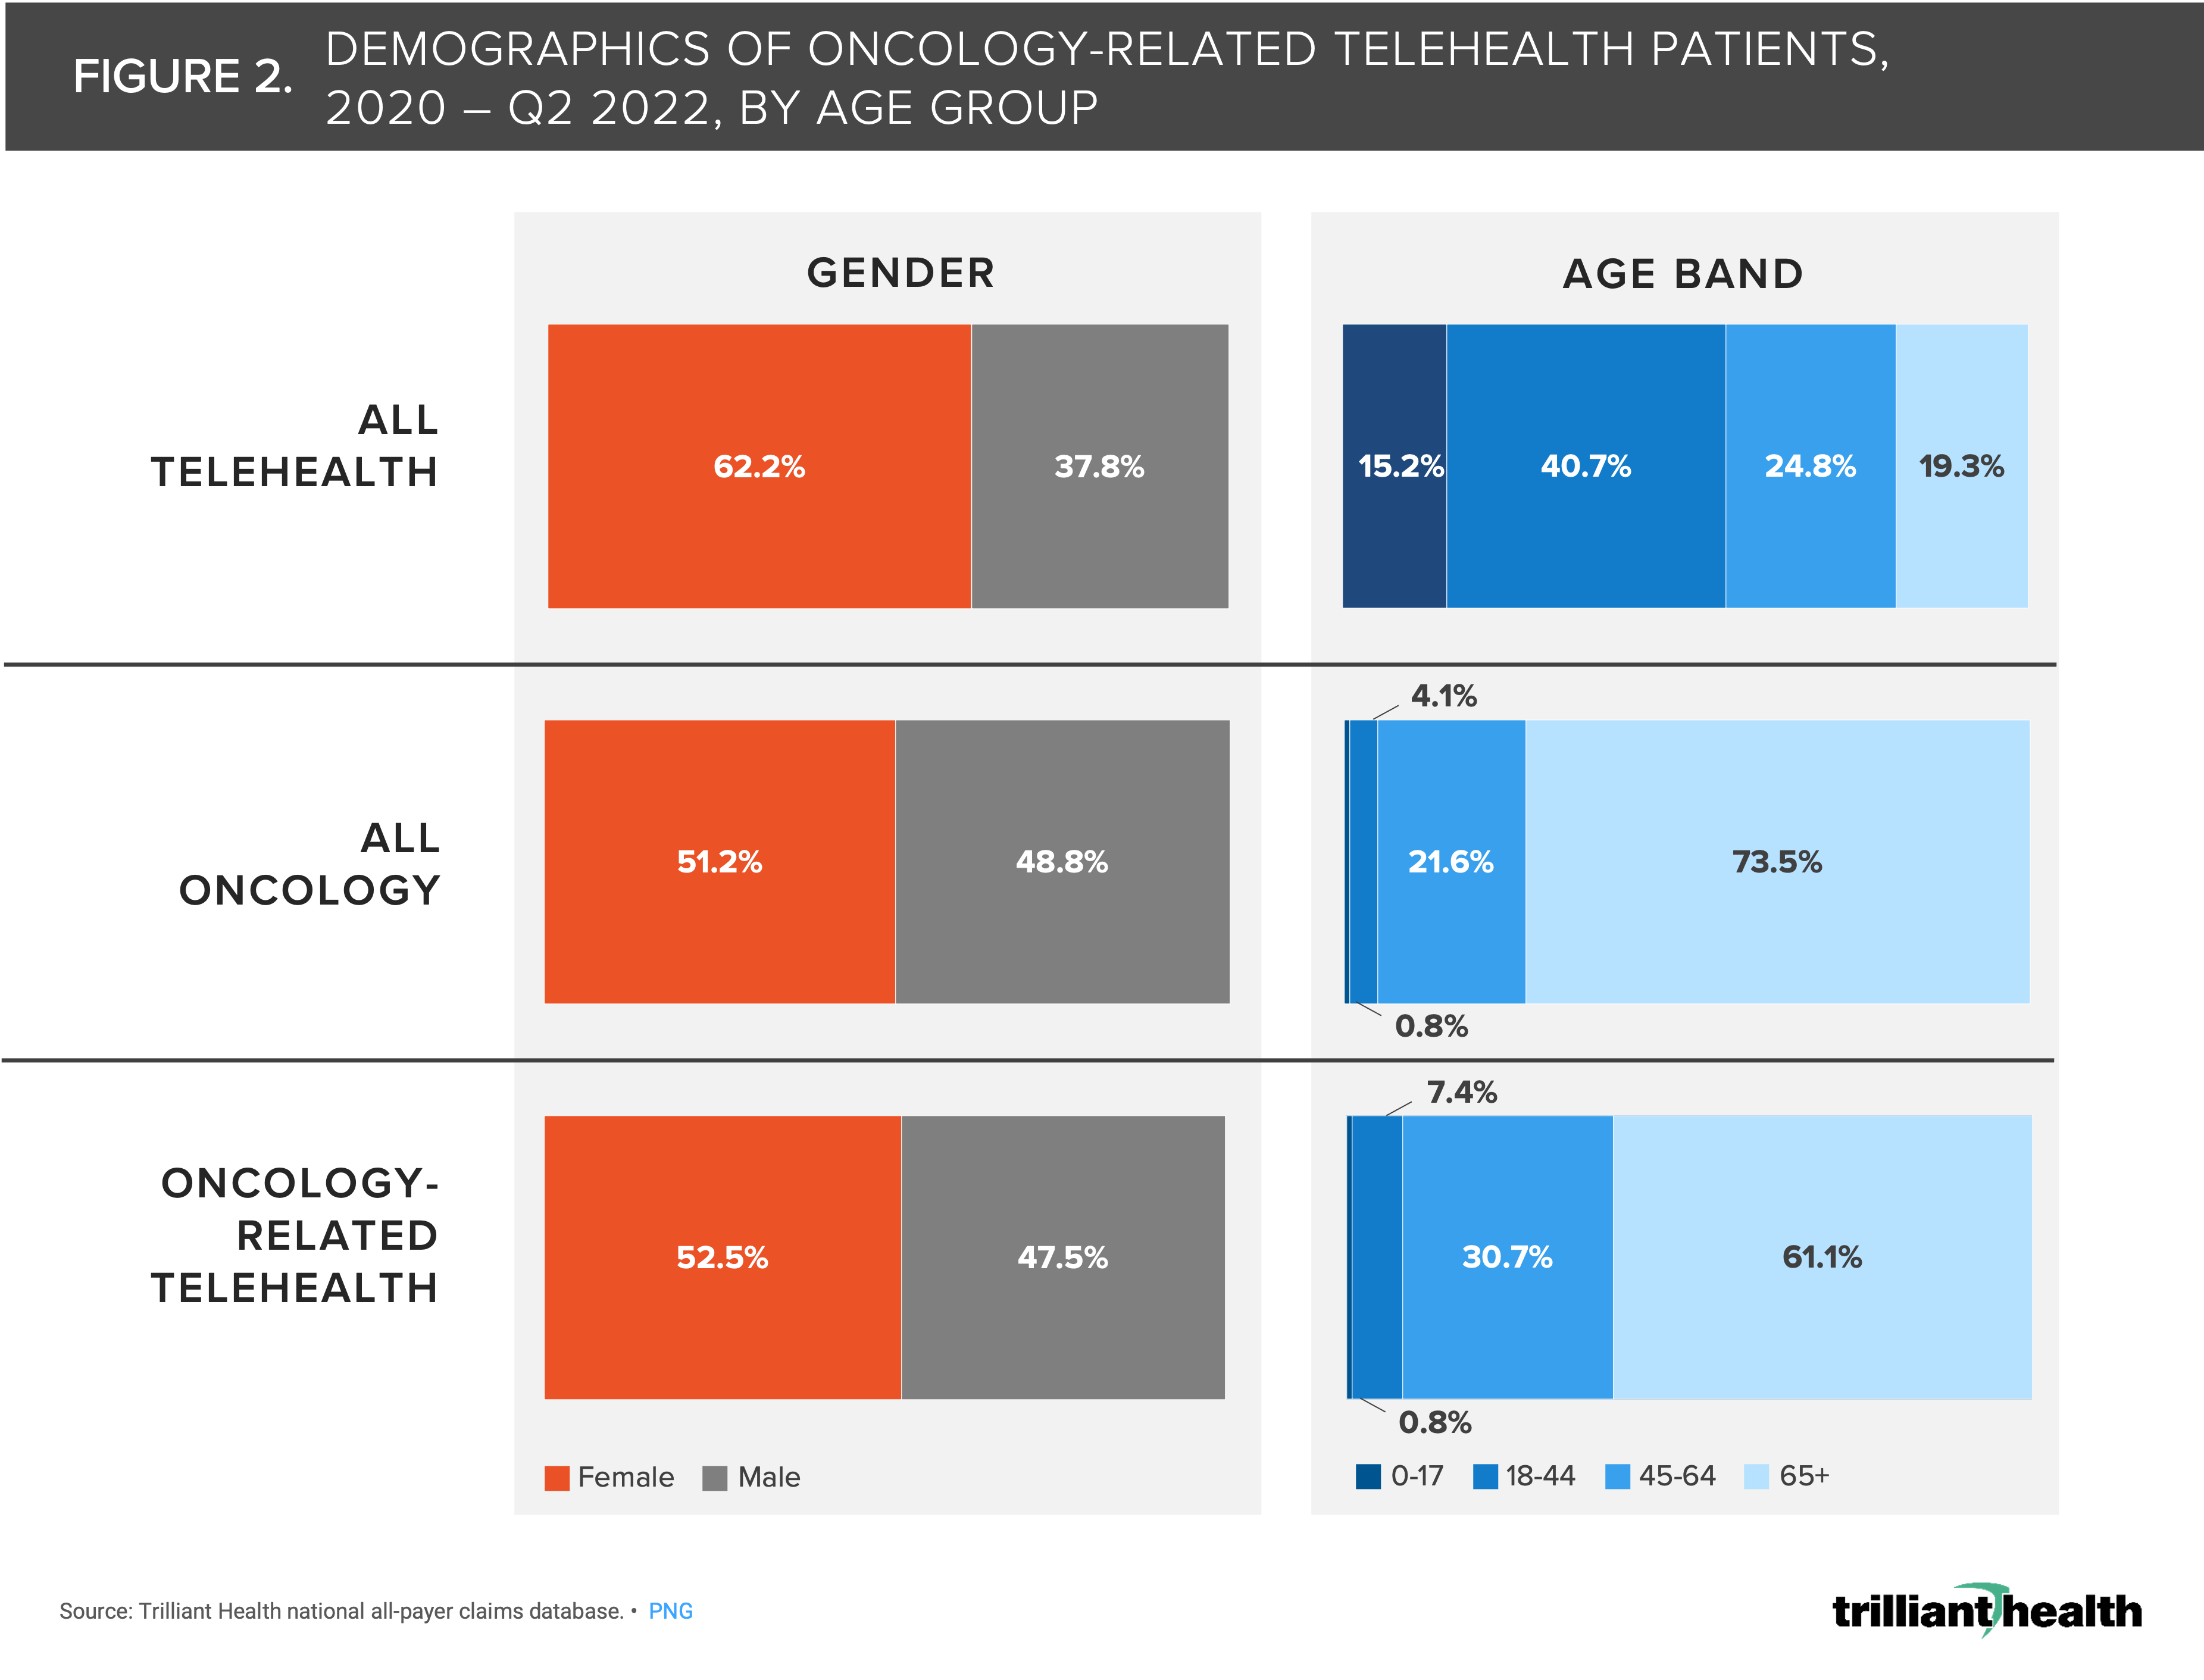 Less Than One Percent of All Telehealth Visits Are for Oncology Care